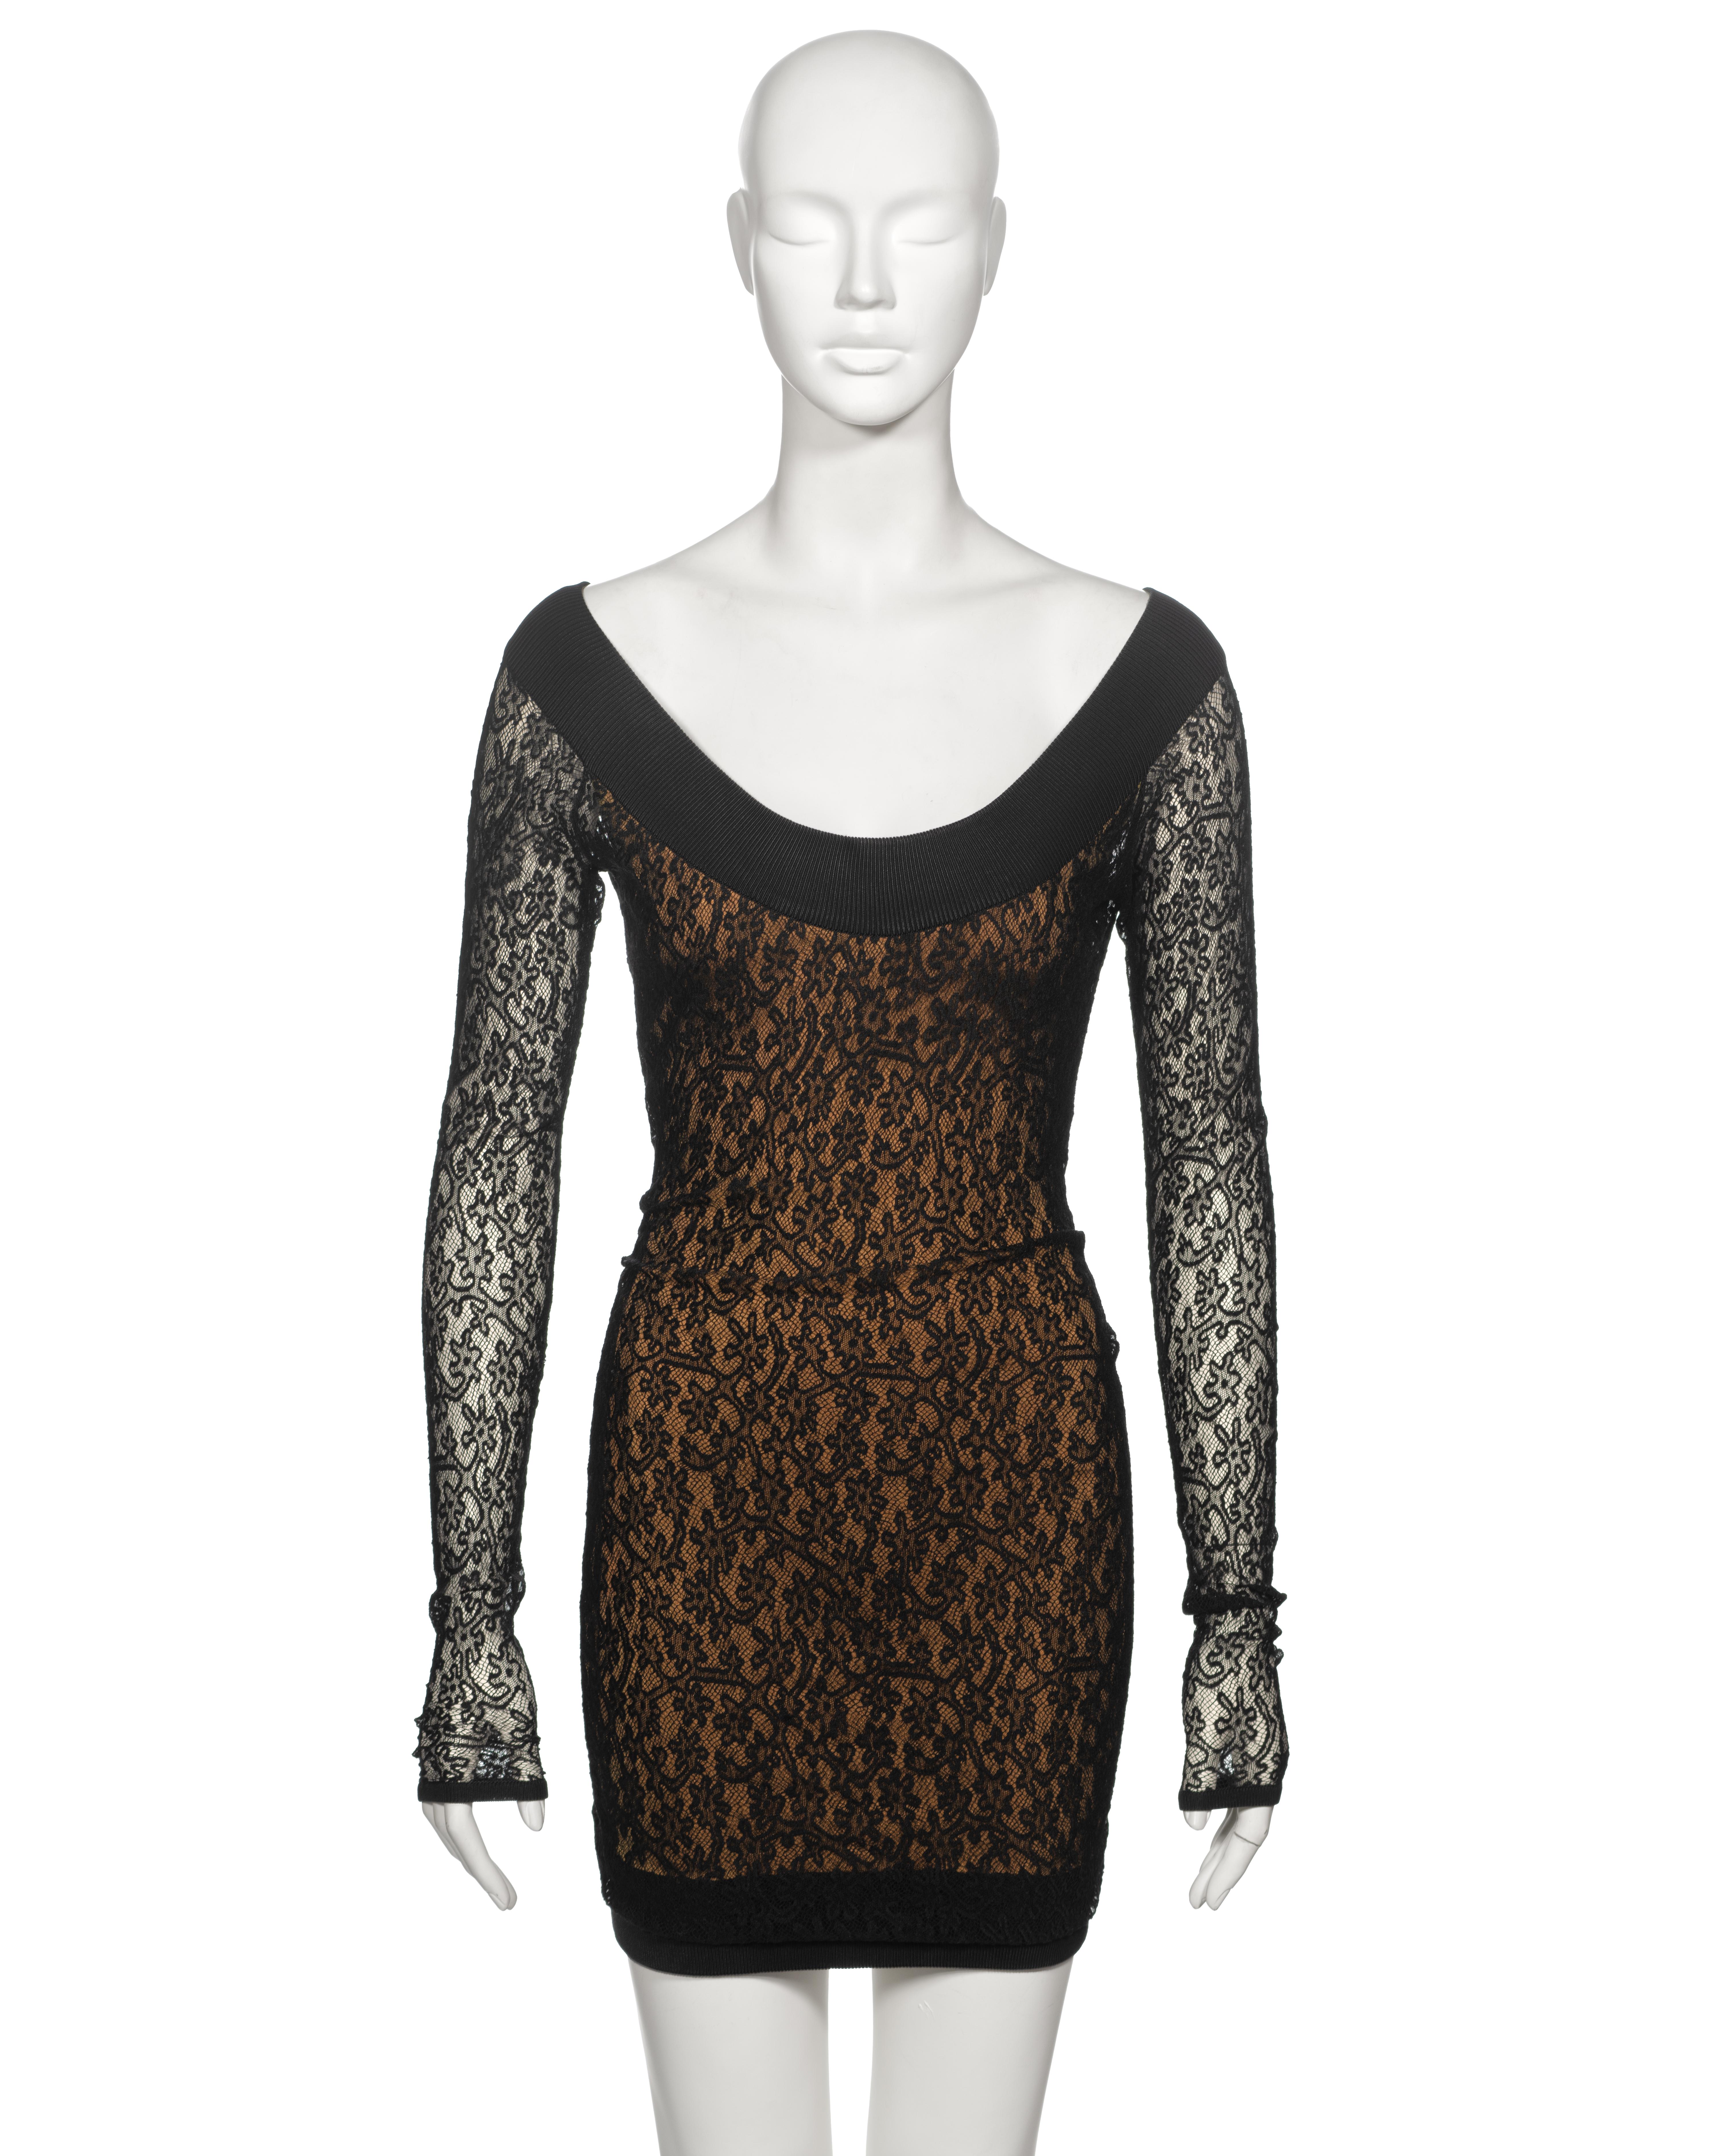 ▪ Archival Alaia Stretch Knit Lace Mini Dress
▪ Creative Director: Azzedine Alaia 
▪ Fall-Winter 1990 
▪ Sold by One of a Kind Archive
▪ Fashioned from black floral stretch knit lace
▪ Showcasing a wide ribbed knit off-shoulder neckline
▪ Unlined